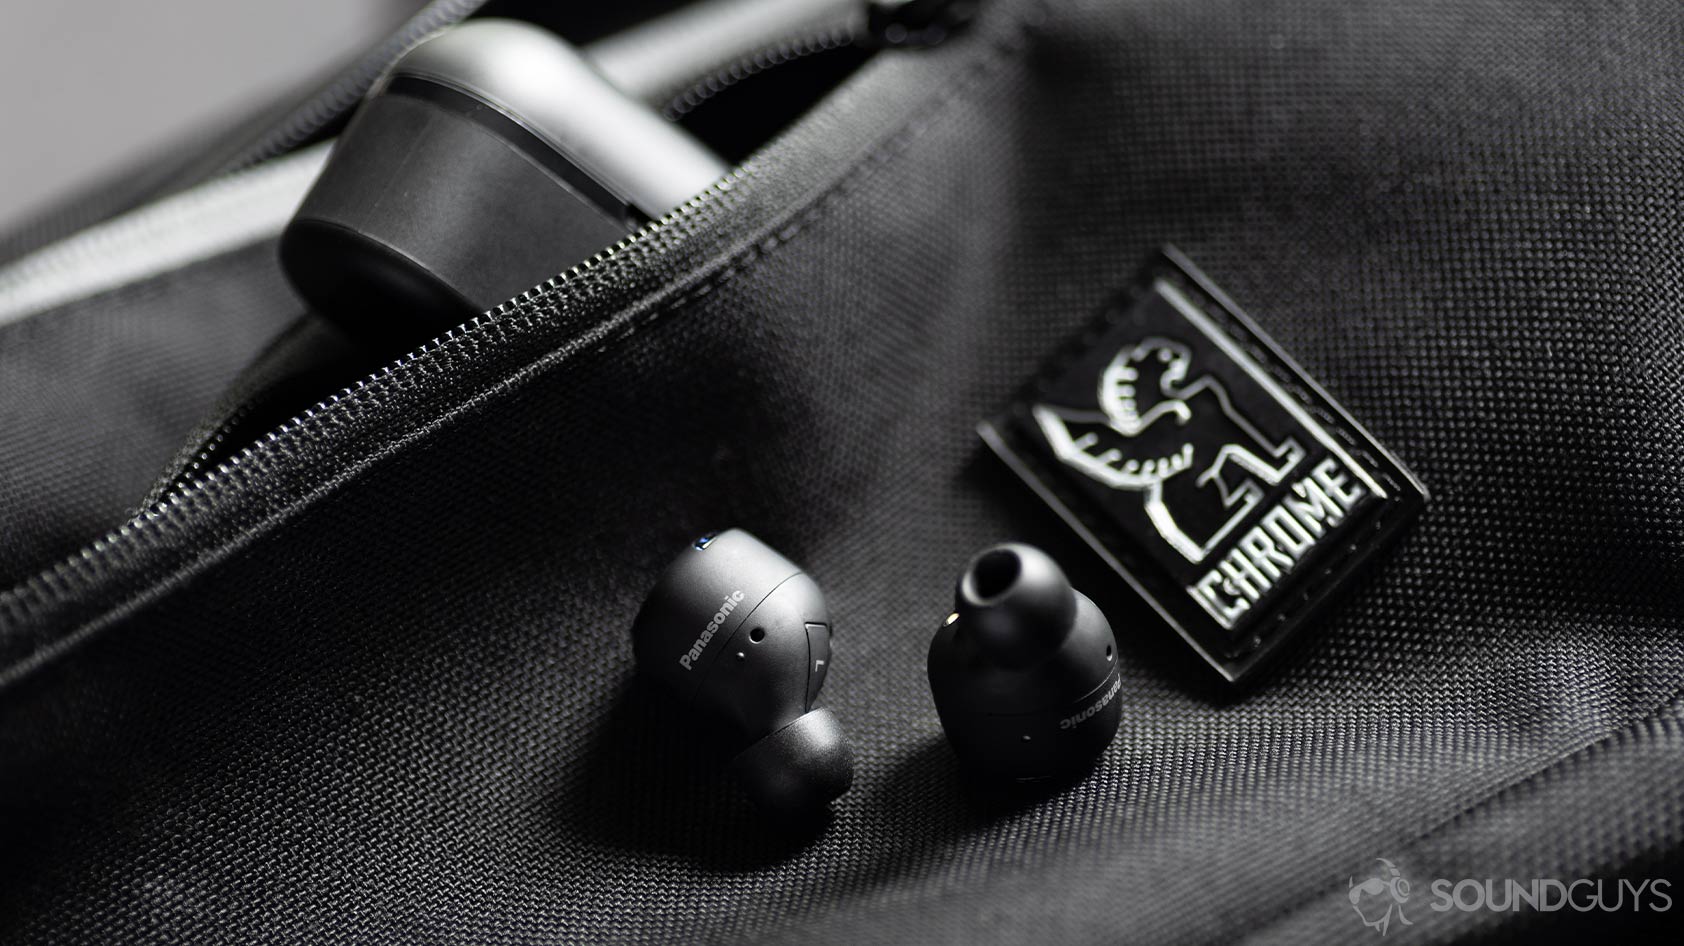 A picture of the Panasonic RZ-S500W noise canceling earbuds on a Chrome sling bag with the case angled in the zippered pocket of the bag.